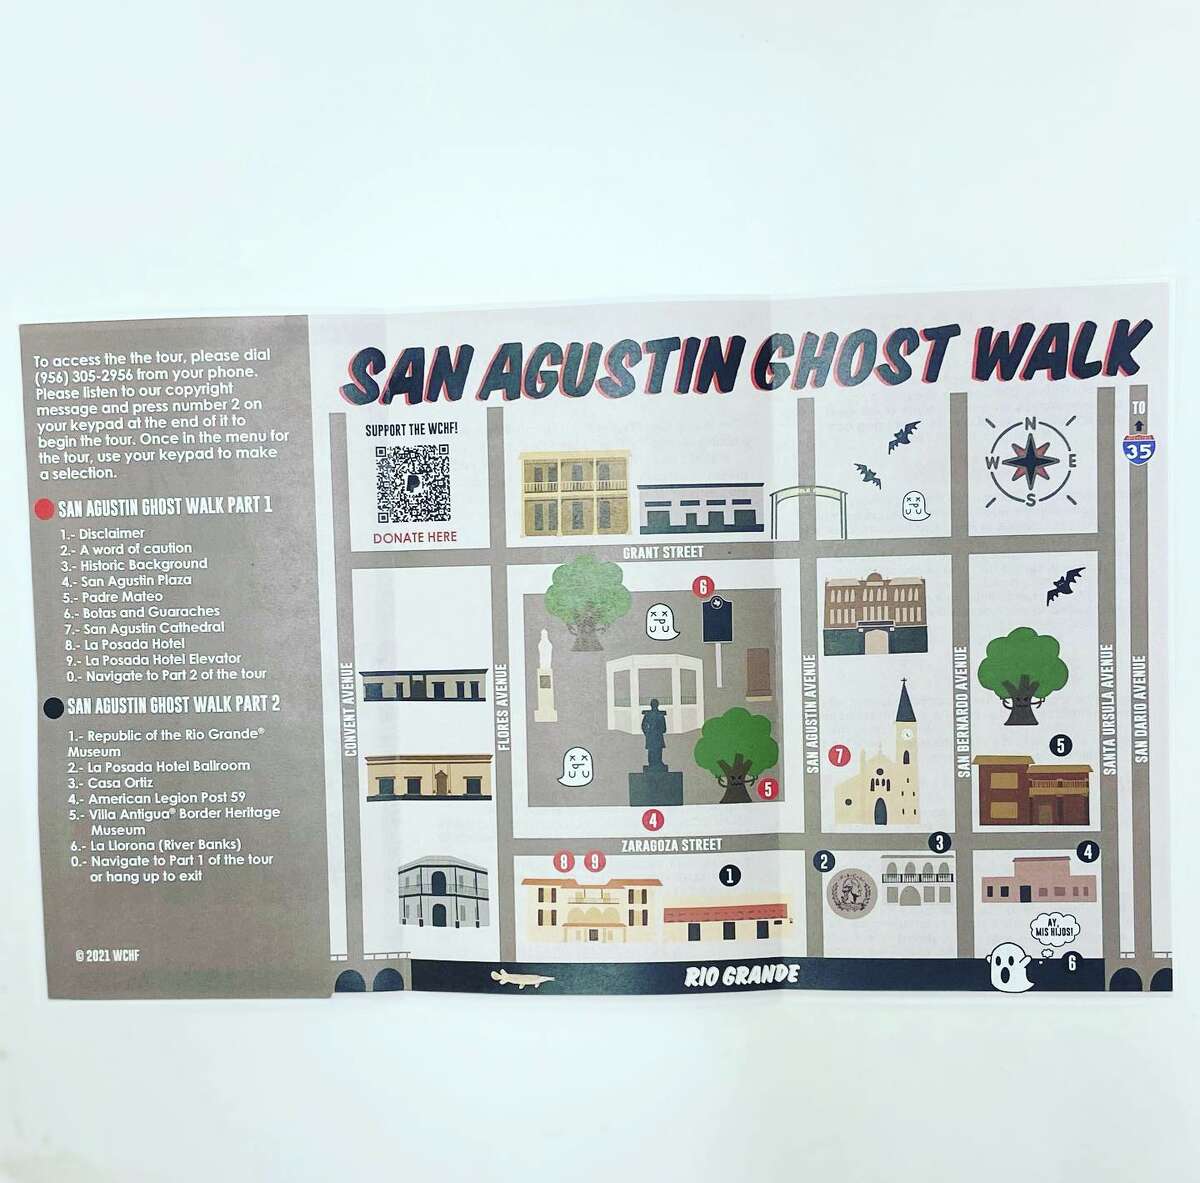 This screen shot shows the map of the San Agustin Ghost Walk.